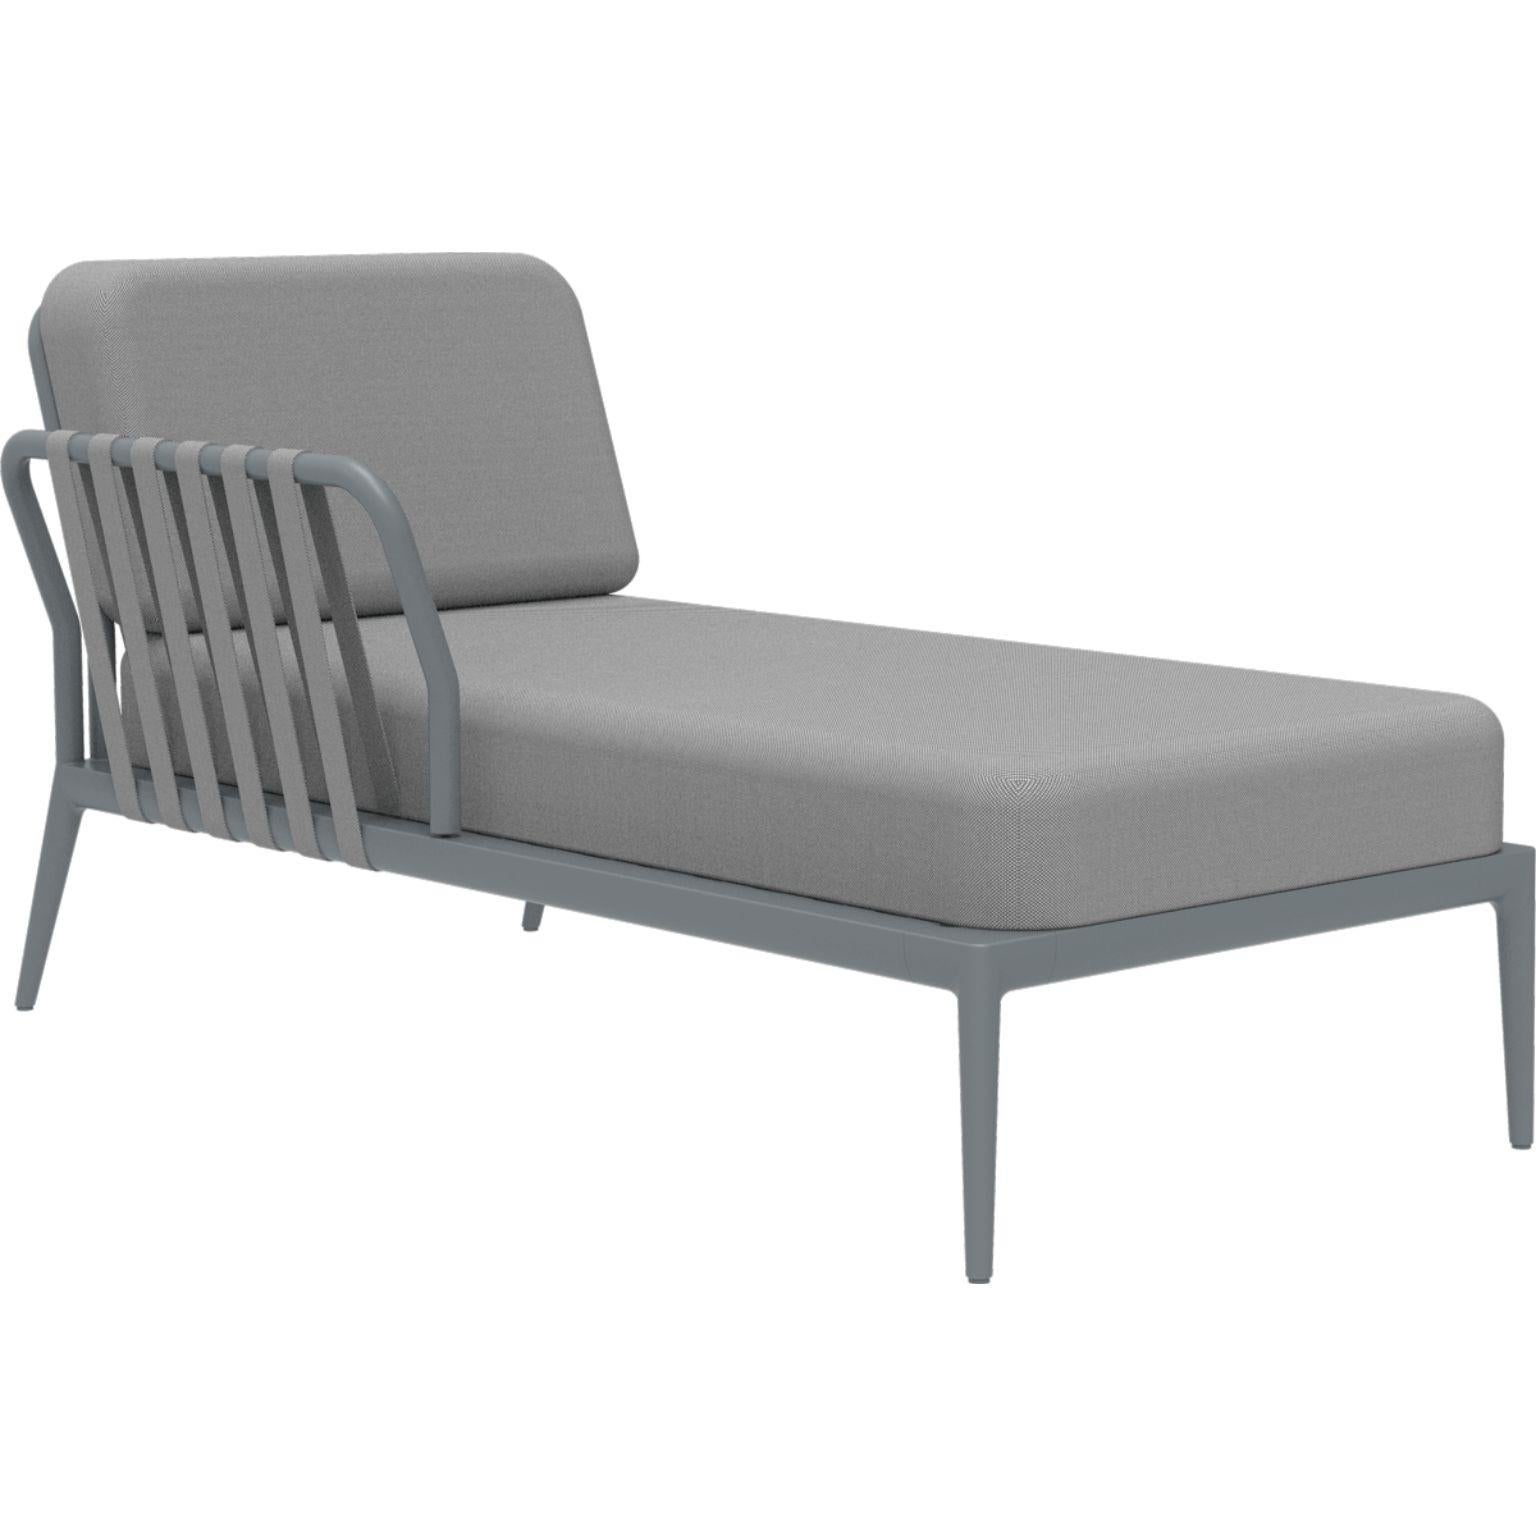 Ribbons grey right chaise longue by MOWEE
Dimensions: D80 x W155 x H81 cm
Material: Aluminum, Upholstery
Weight: 28 kg
Also available in different colours and finishes.

An unmistakable collection for its beauty and robustness. A tribute to